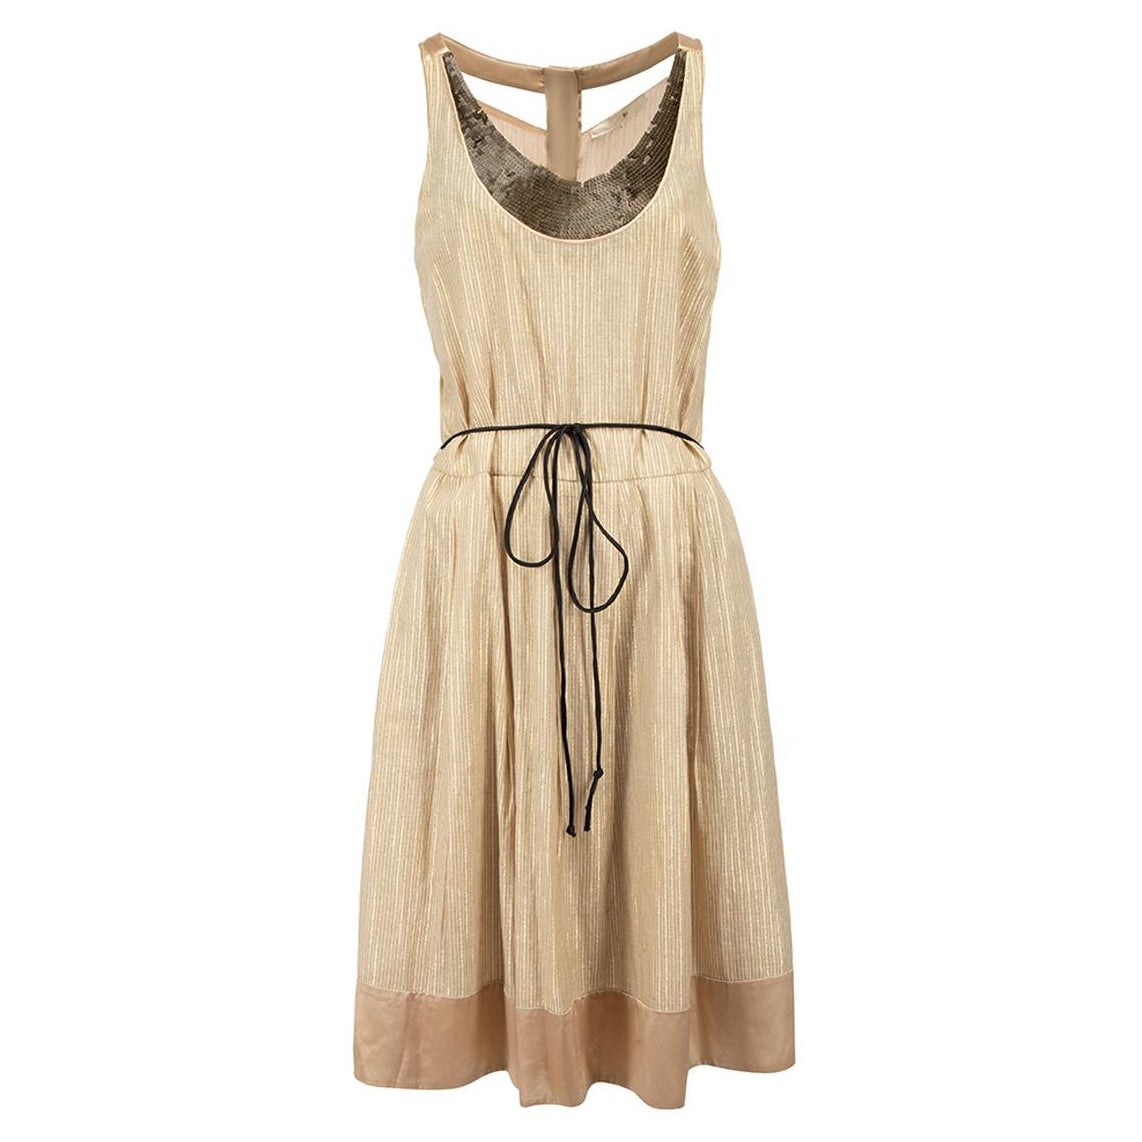 Gold Cotton Sleeveless Dress Size M For Sale